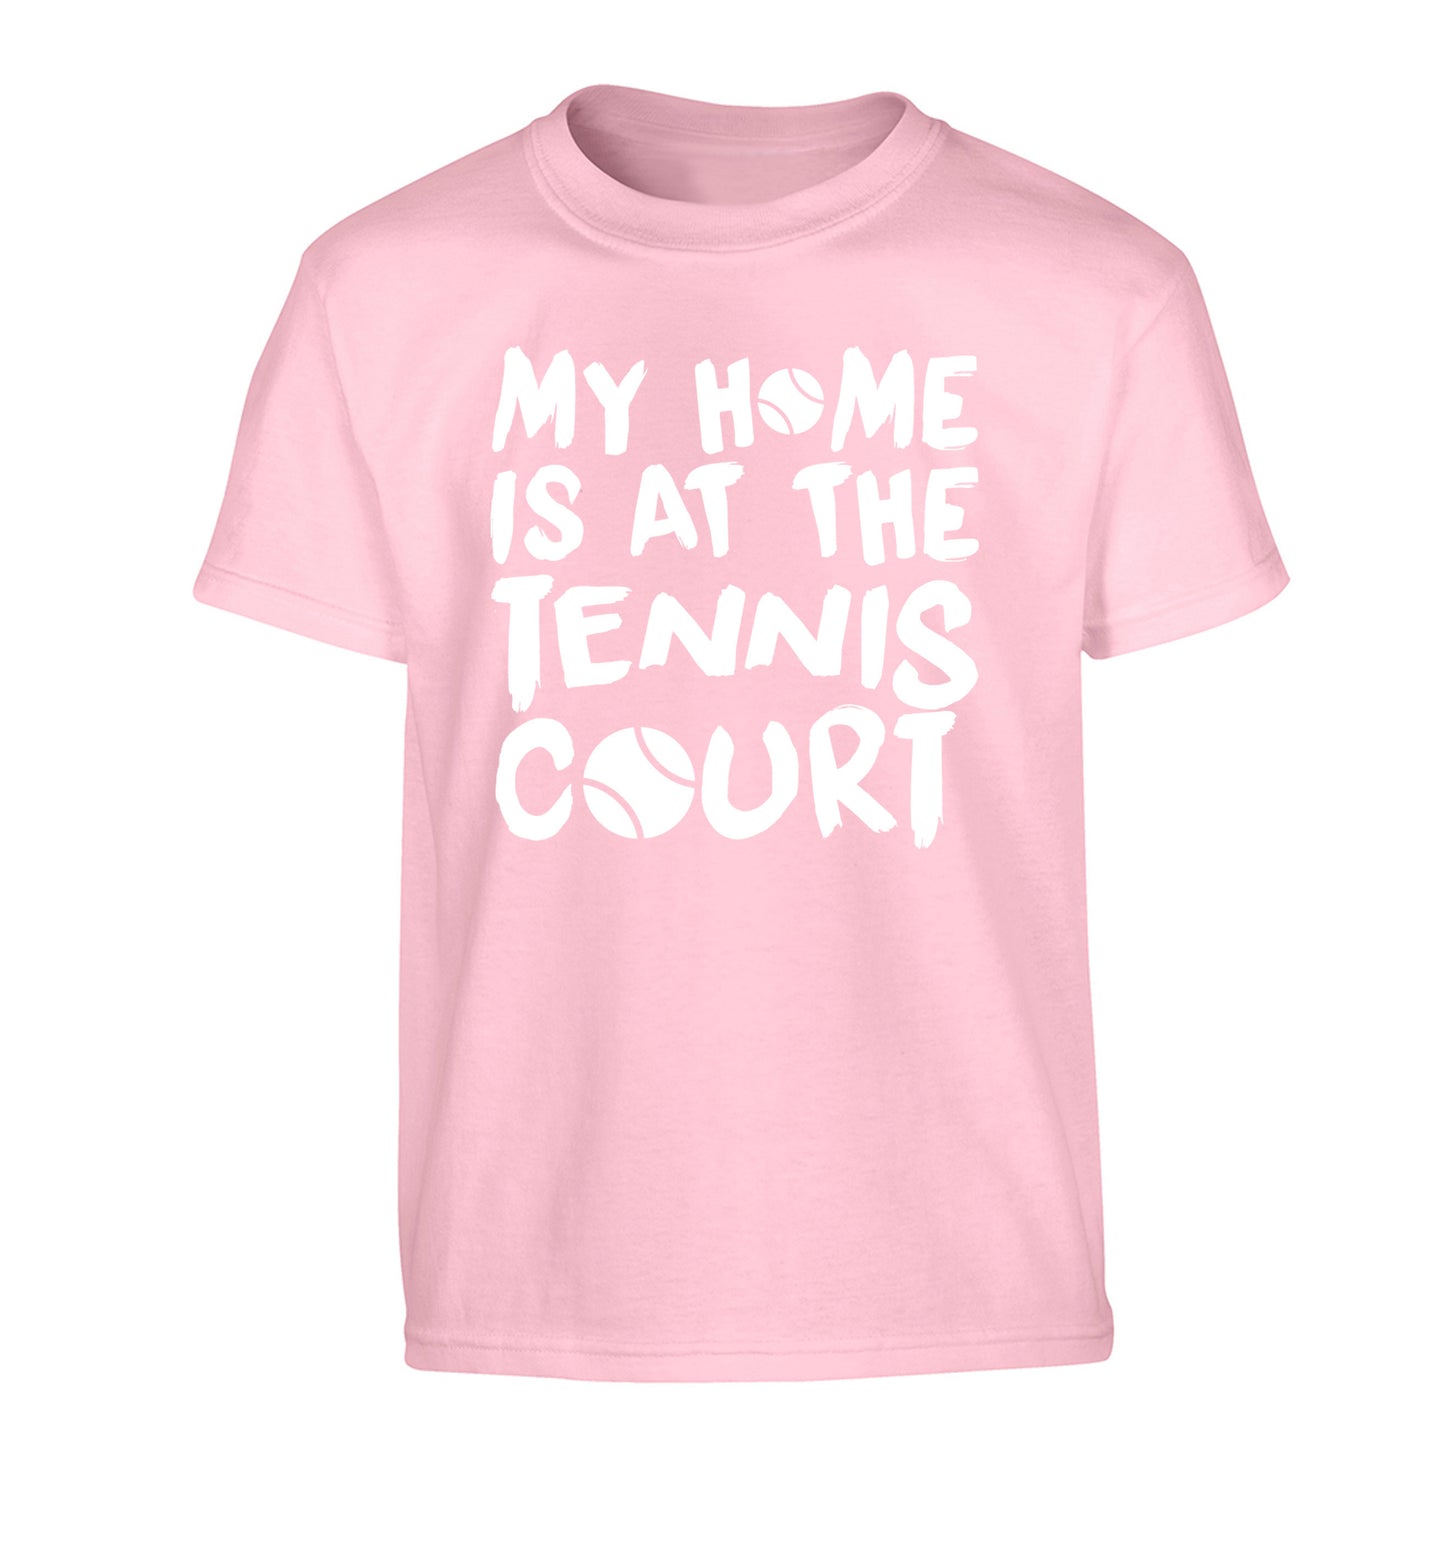 My home is at the tennis court Children's light pink Tshirt 12-14 Years